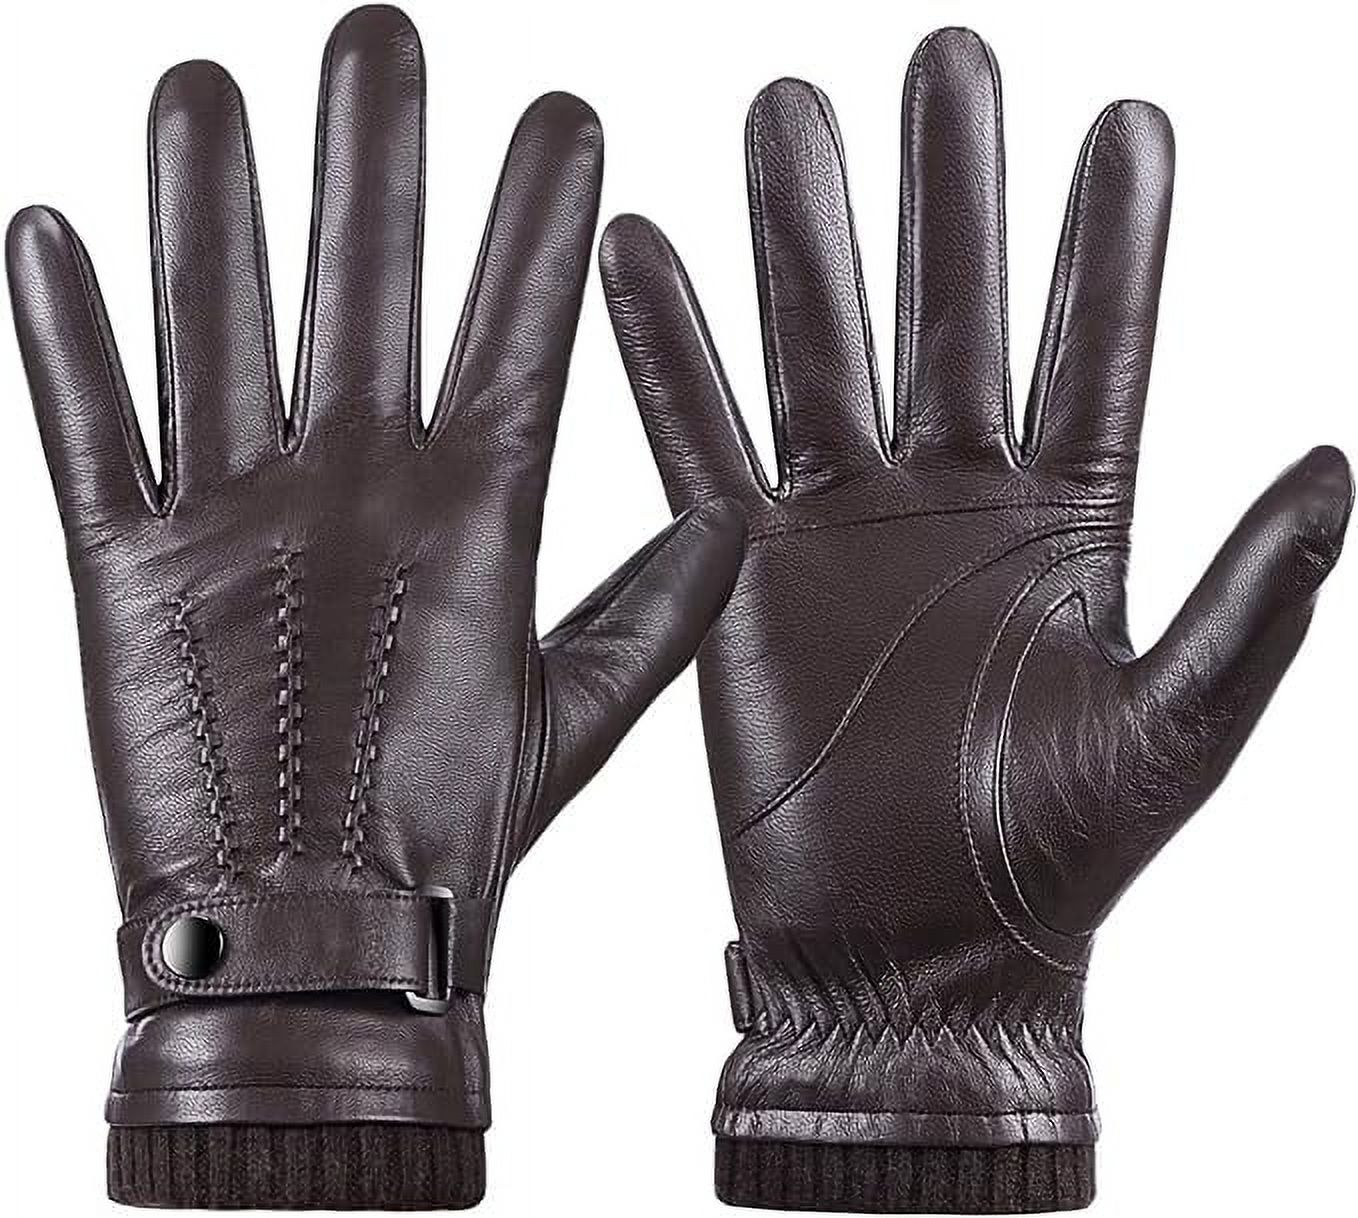 Whiteleopard Men's Winter Sheepskin Leather Gloves with Cashmere Lining, Keep Warm and Use Your Touchscreen Devices, Ideal for Outdoor Activities and Driving - image 1 of 6